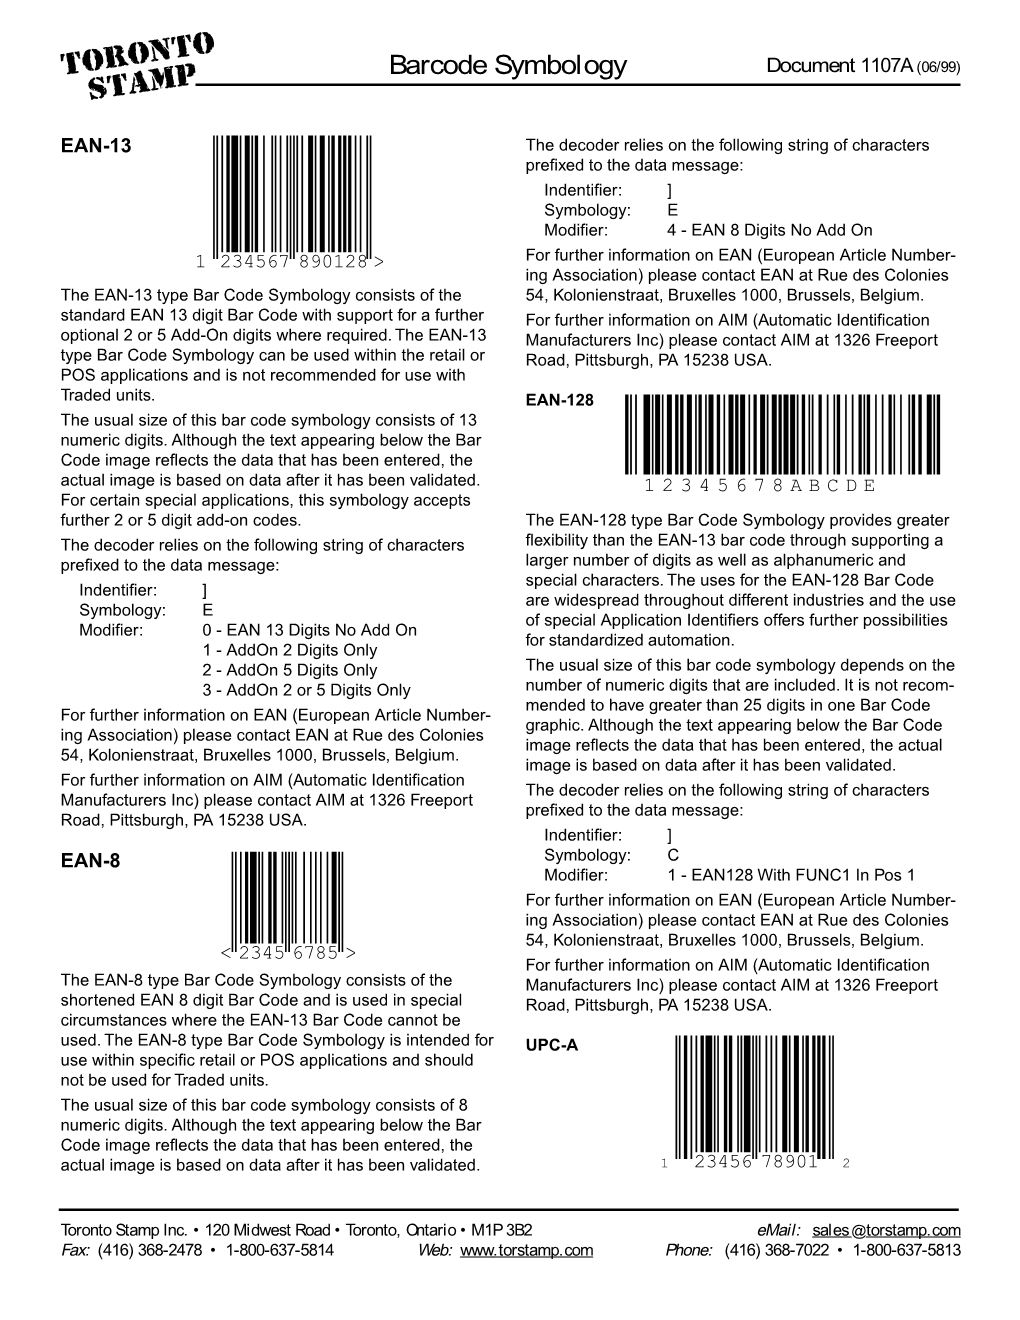 Barcode Symbology Document 1107A (06/99) STAMP